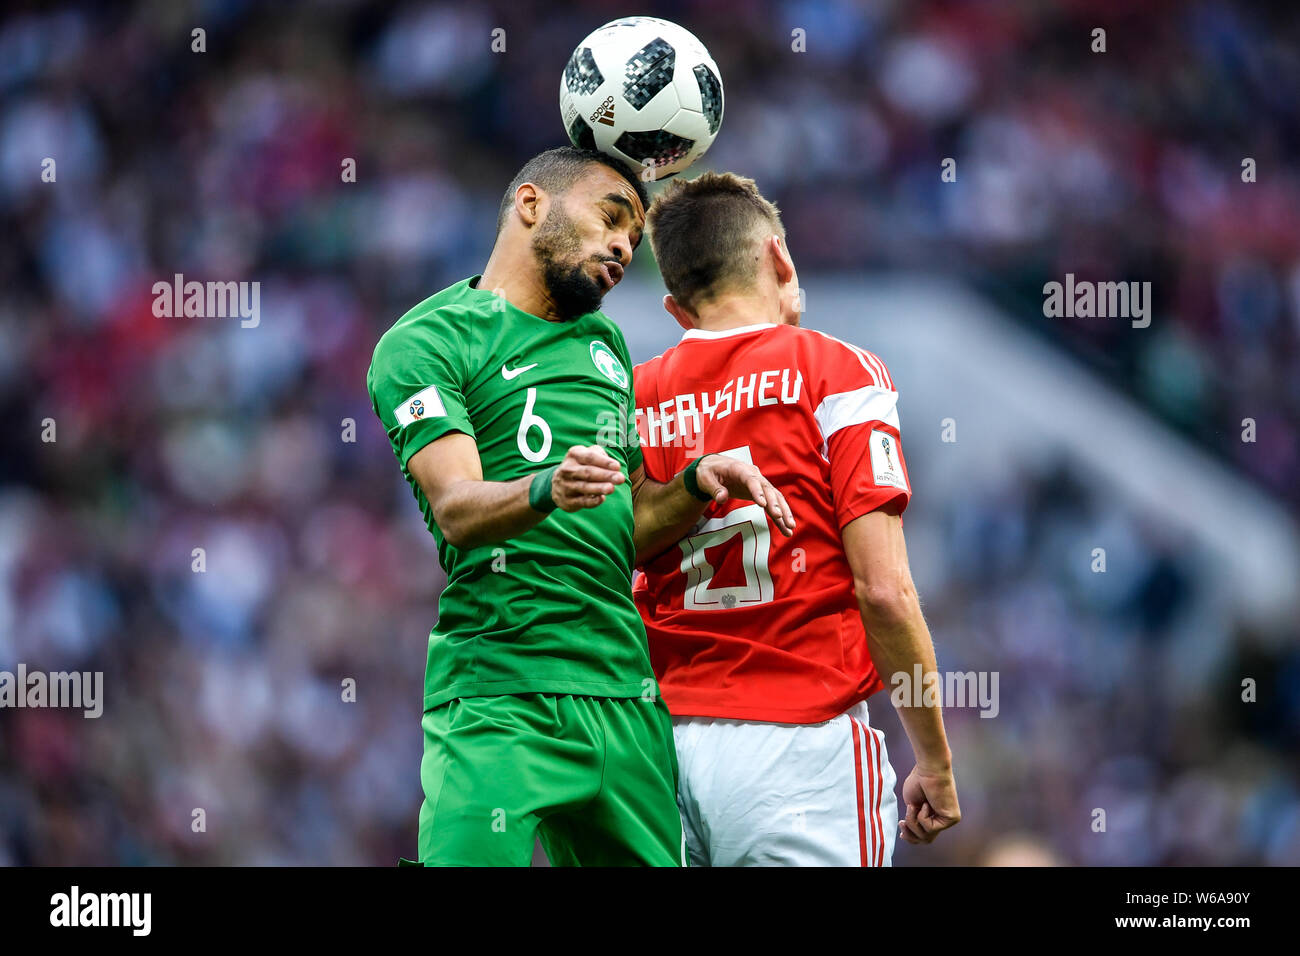 Mohammed Al-Breik of Saudi Arabia, left, heads the ball against Denis Cheryshev of Russia in their Group A match during the 2018 FIFA World Cup in Mos Stock Photo